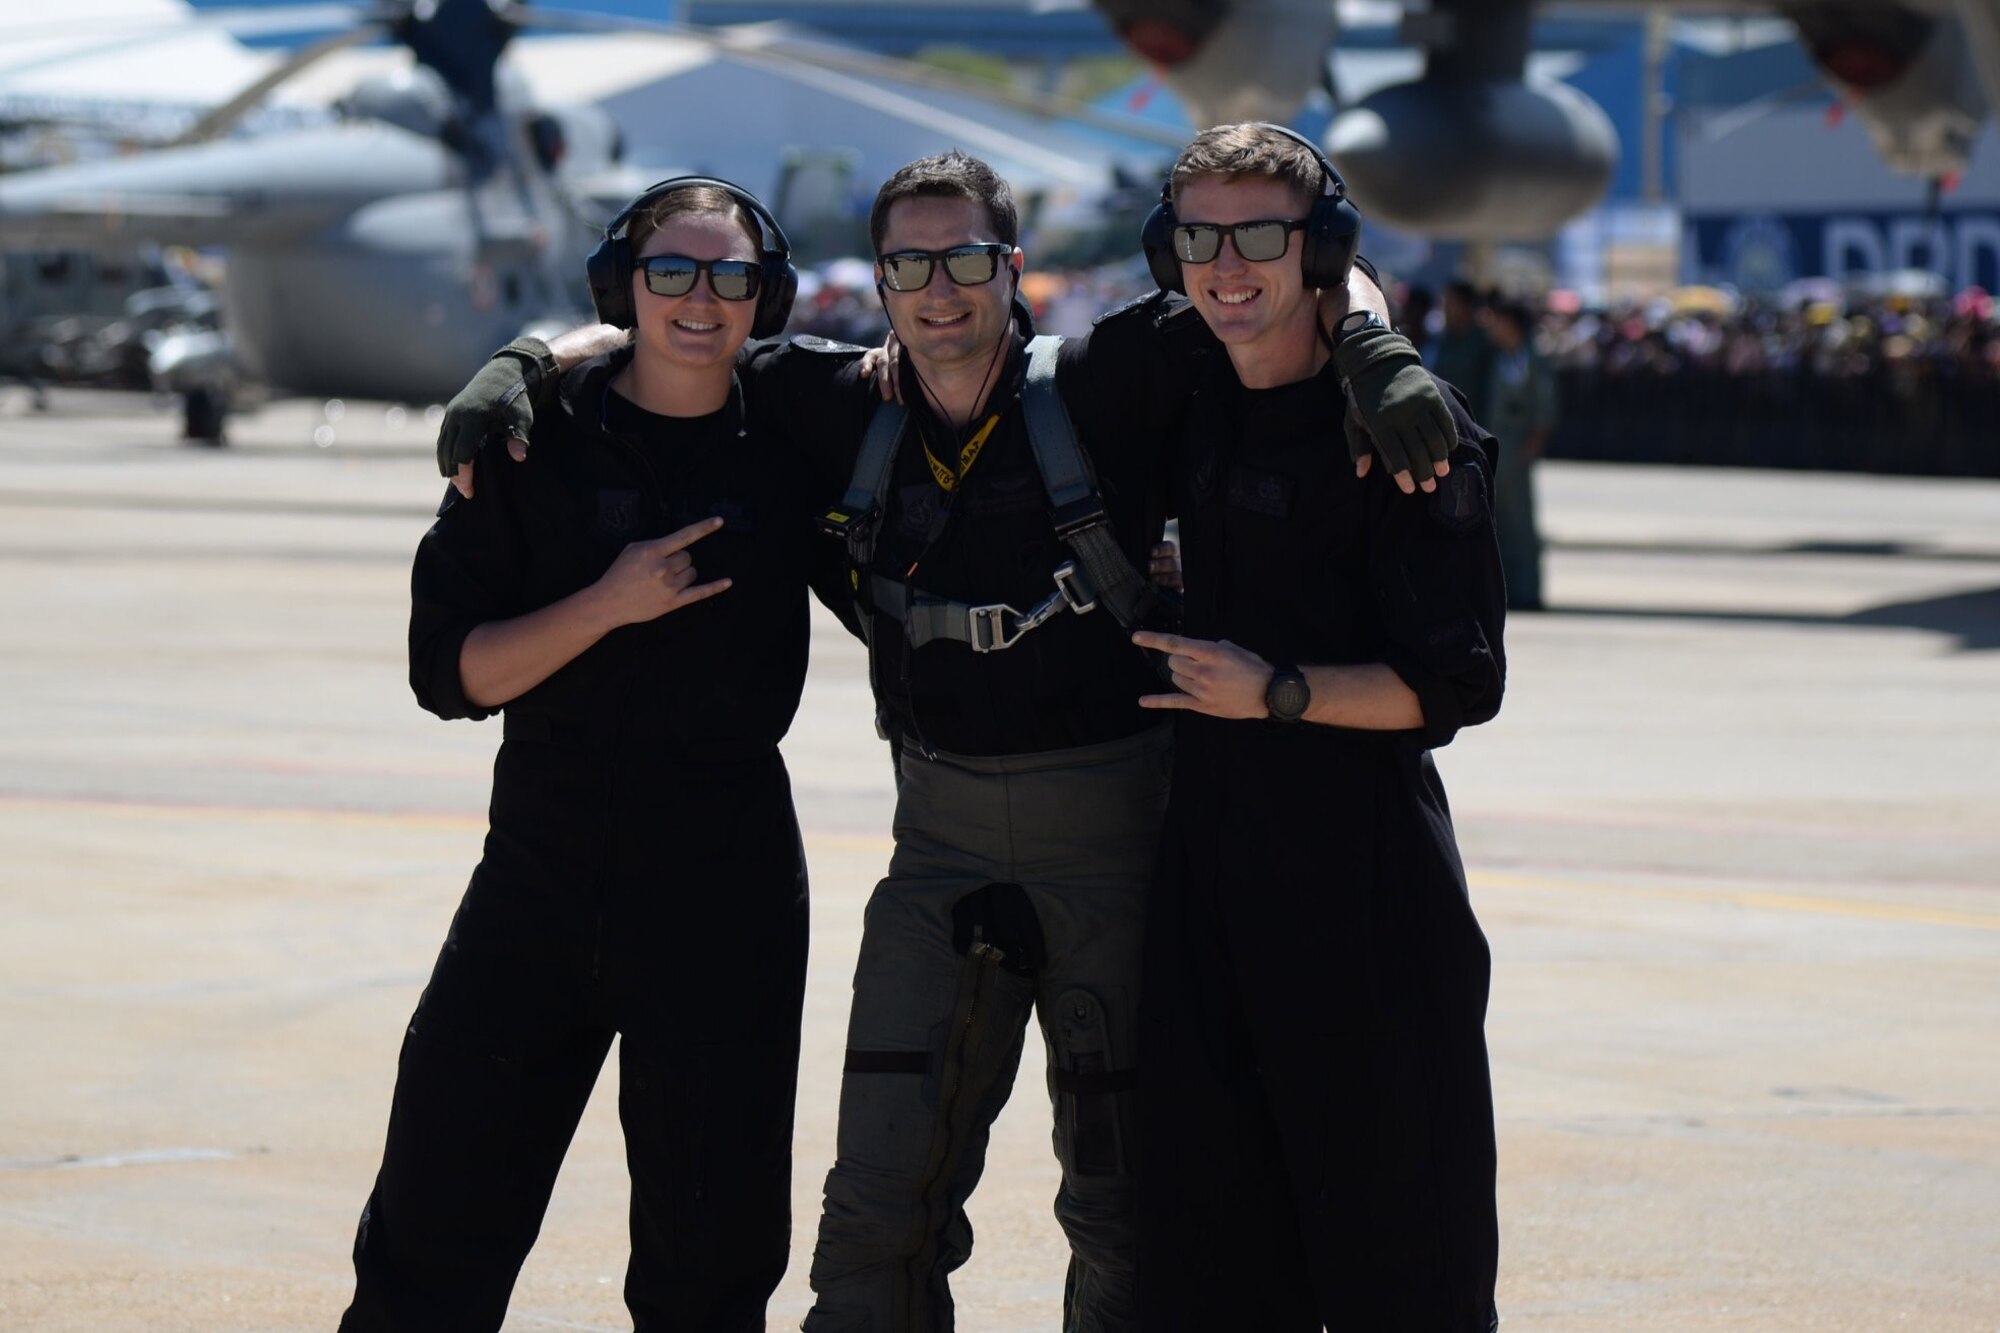 U.S. Air Force Staff Sgt. Emily Wall, left, former lead crew chief, Capt. Jacob “Primo” Impellizzeri, center, commander and pilot, and Staff Sgt. Dane Pendzinski, right, crew chief, all with the Pacific Air Forces F-16 Fighting Falcon Demonstration Team, pause for a photo at the Aero India Air Show, India, Feb. 23, 2019. Impellizzeri and his team have travelled to South Korea, Alaska, New Zealand, India, Thailand, Guam, the United Kingdom and multiple Japan prefectures to promote cohesion, unity and friendship between the U.S. and its’ allies. (Courtesy photo)